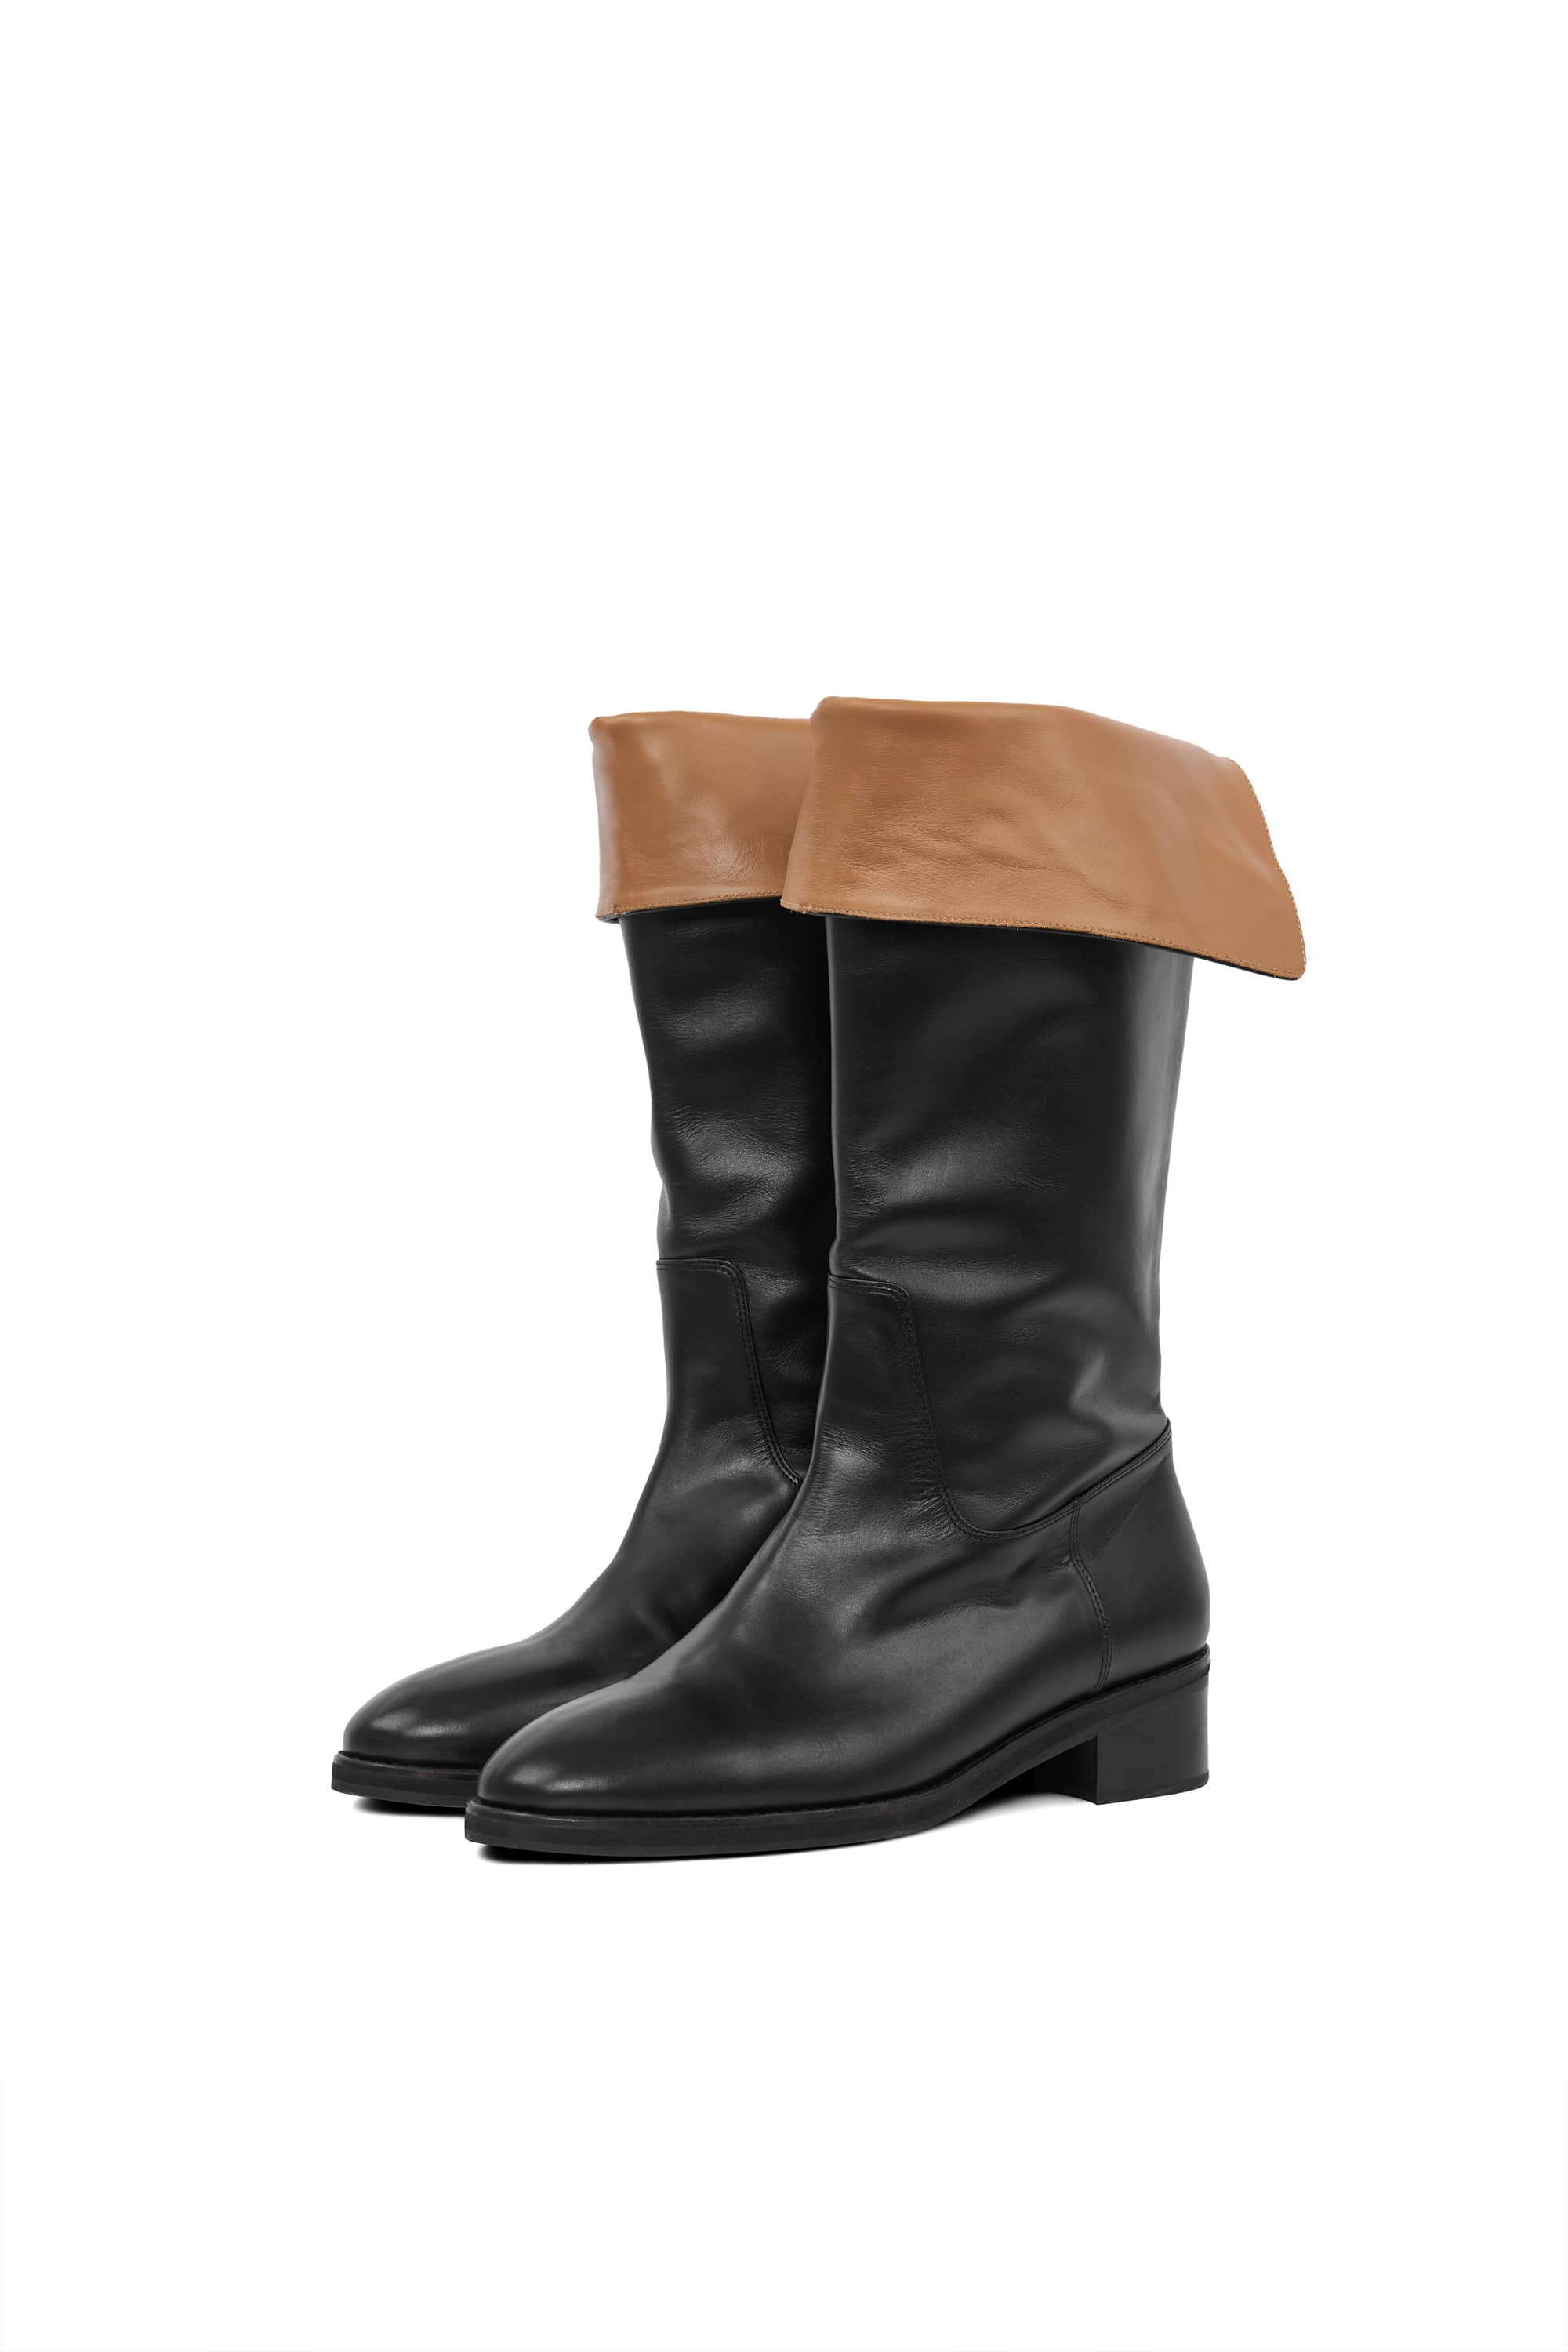 WEATHER FOLDED BOOTS_BLACK/BROWN